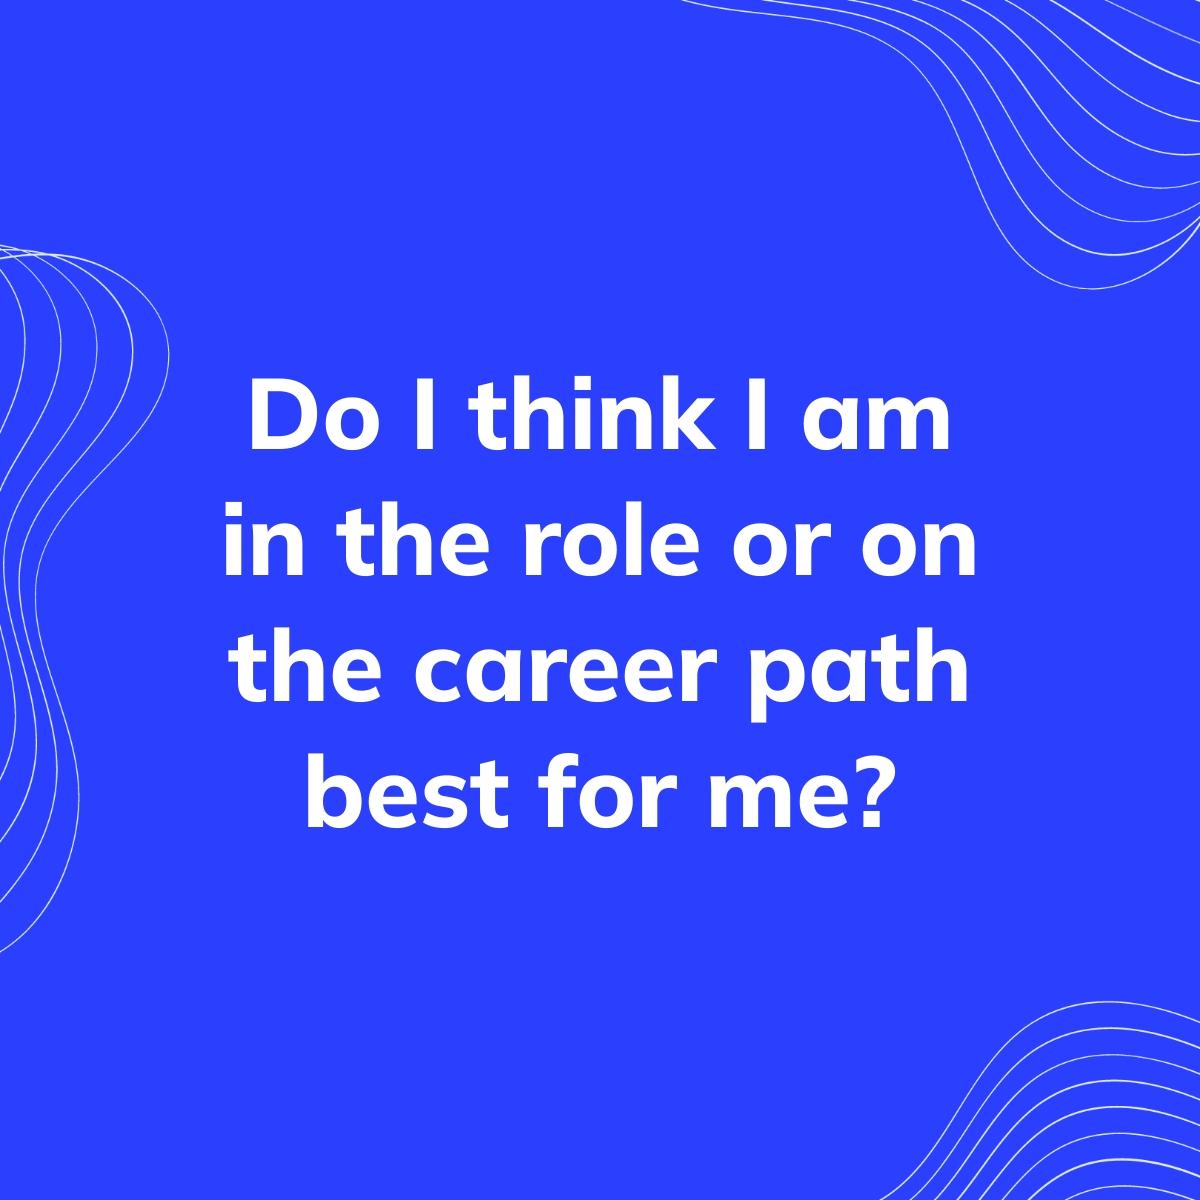 Journal Prompt: Do I think I am in the role or on the career path best for me?